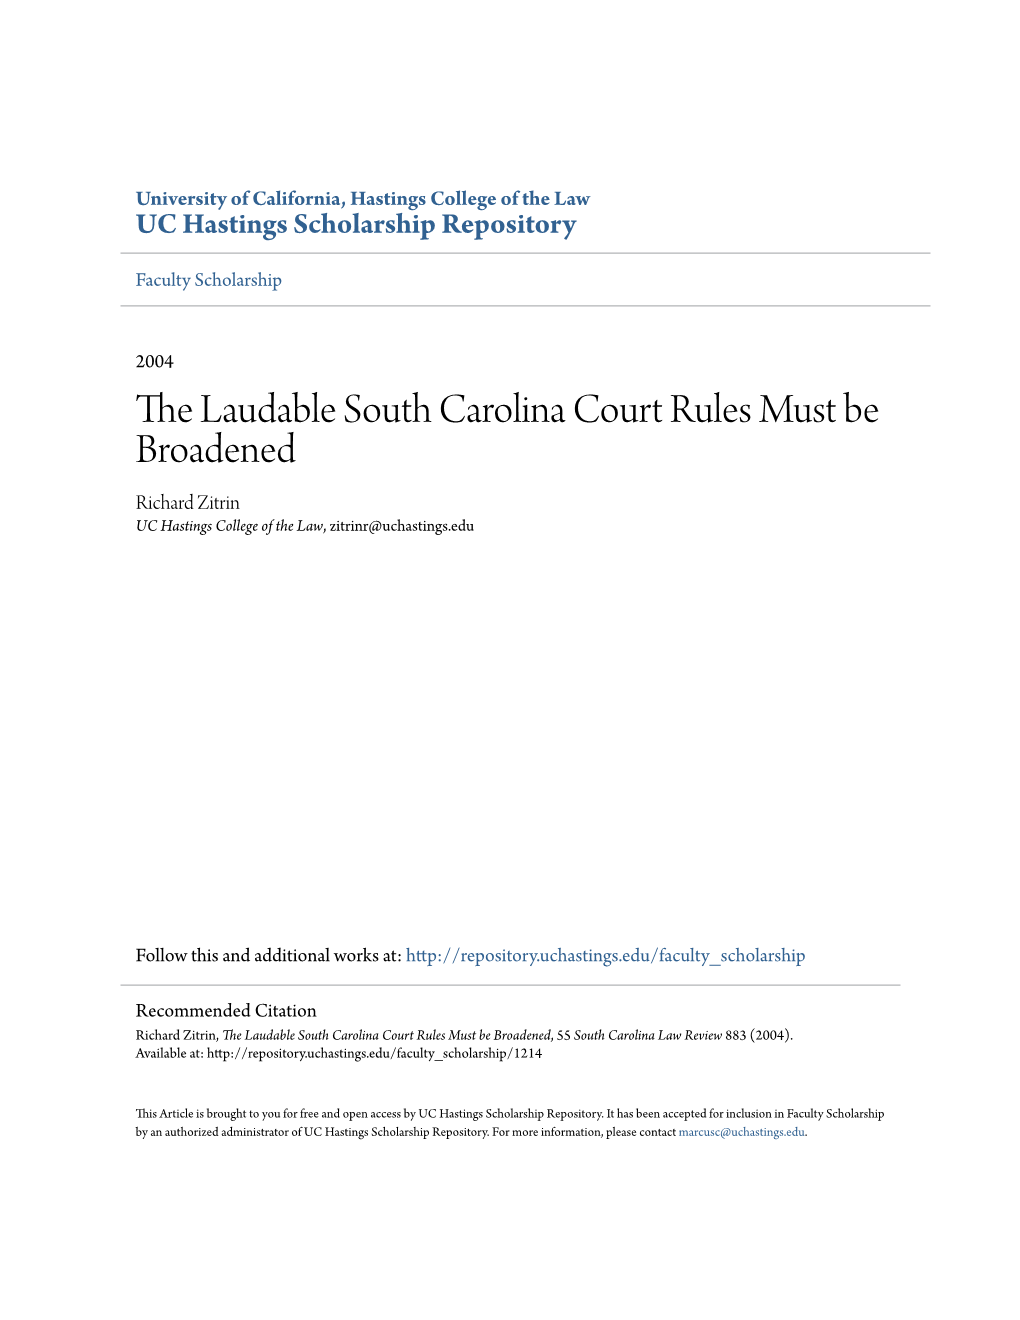 The Laudable South Carolina Court Rules Must Be Broadened Richard Zitrin UC Hastings College of the Law, Zitrinr@Uchastings.Edu